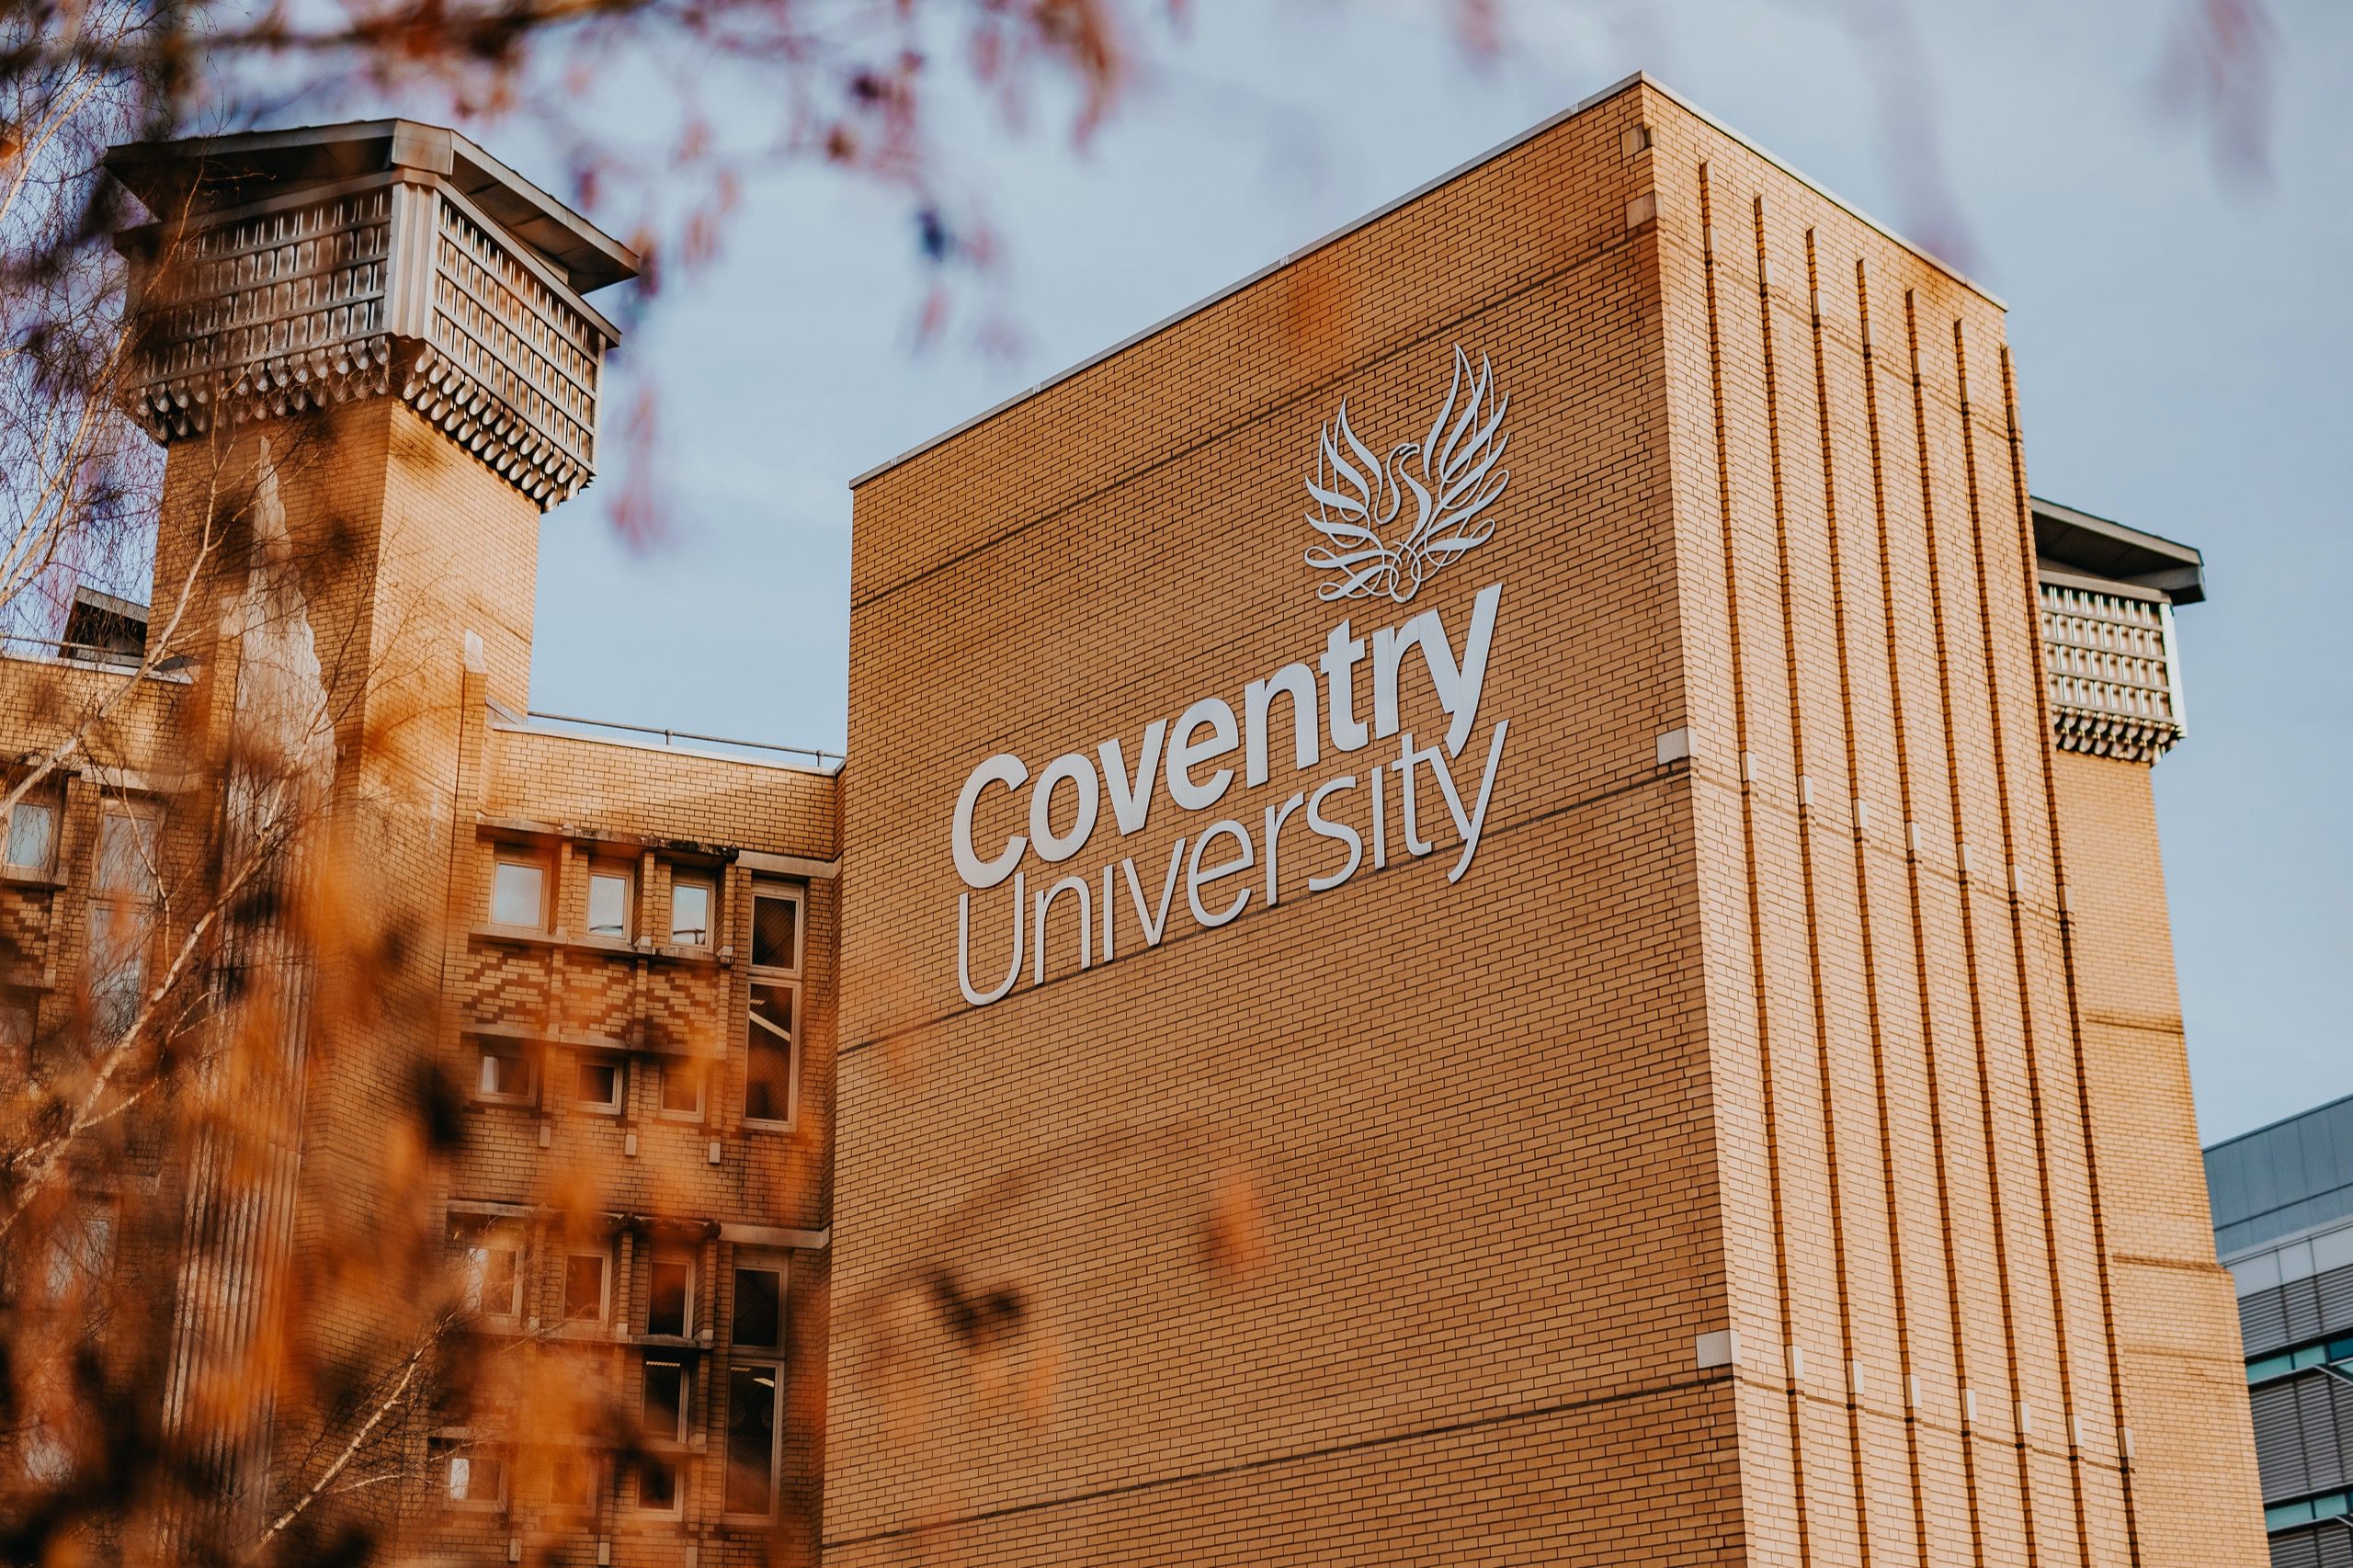 Coventry University logo on the side of a building.